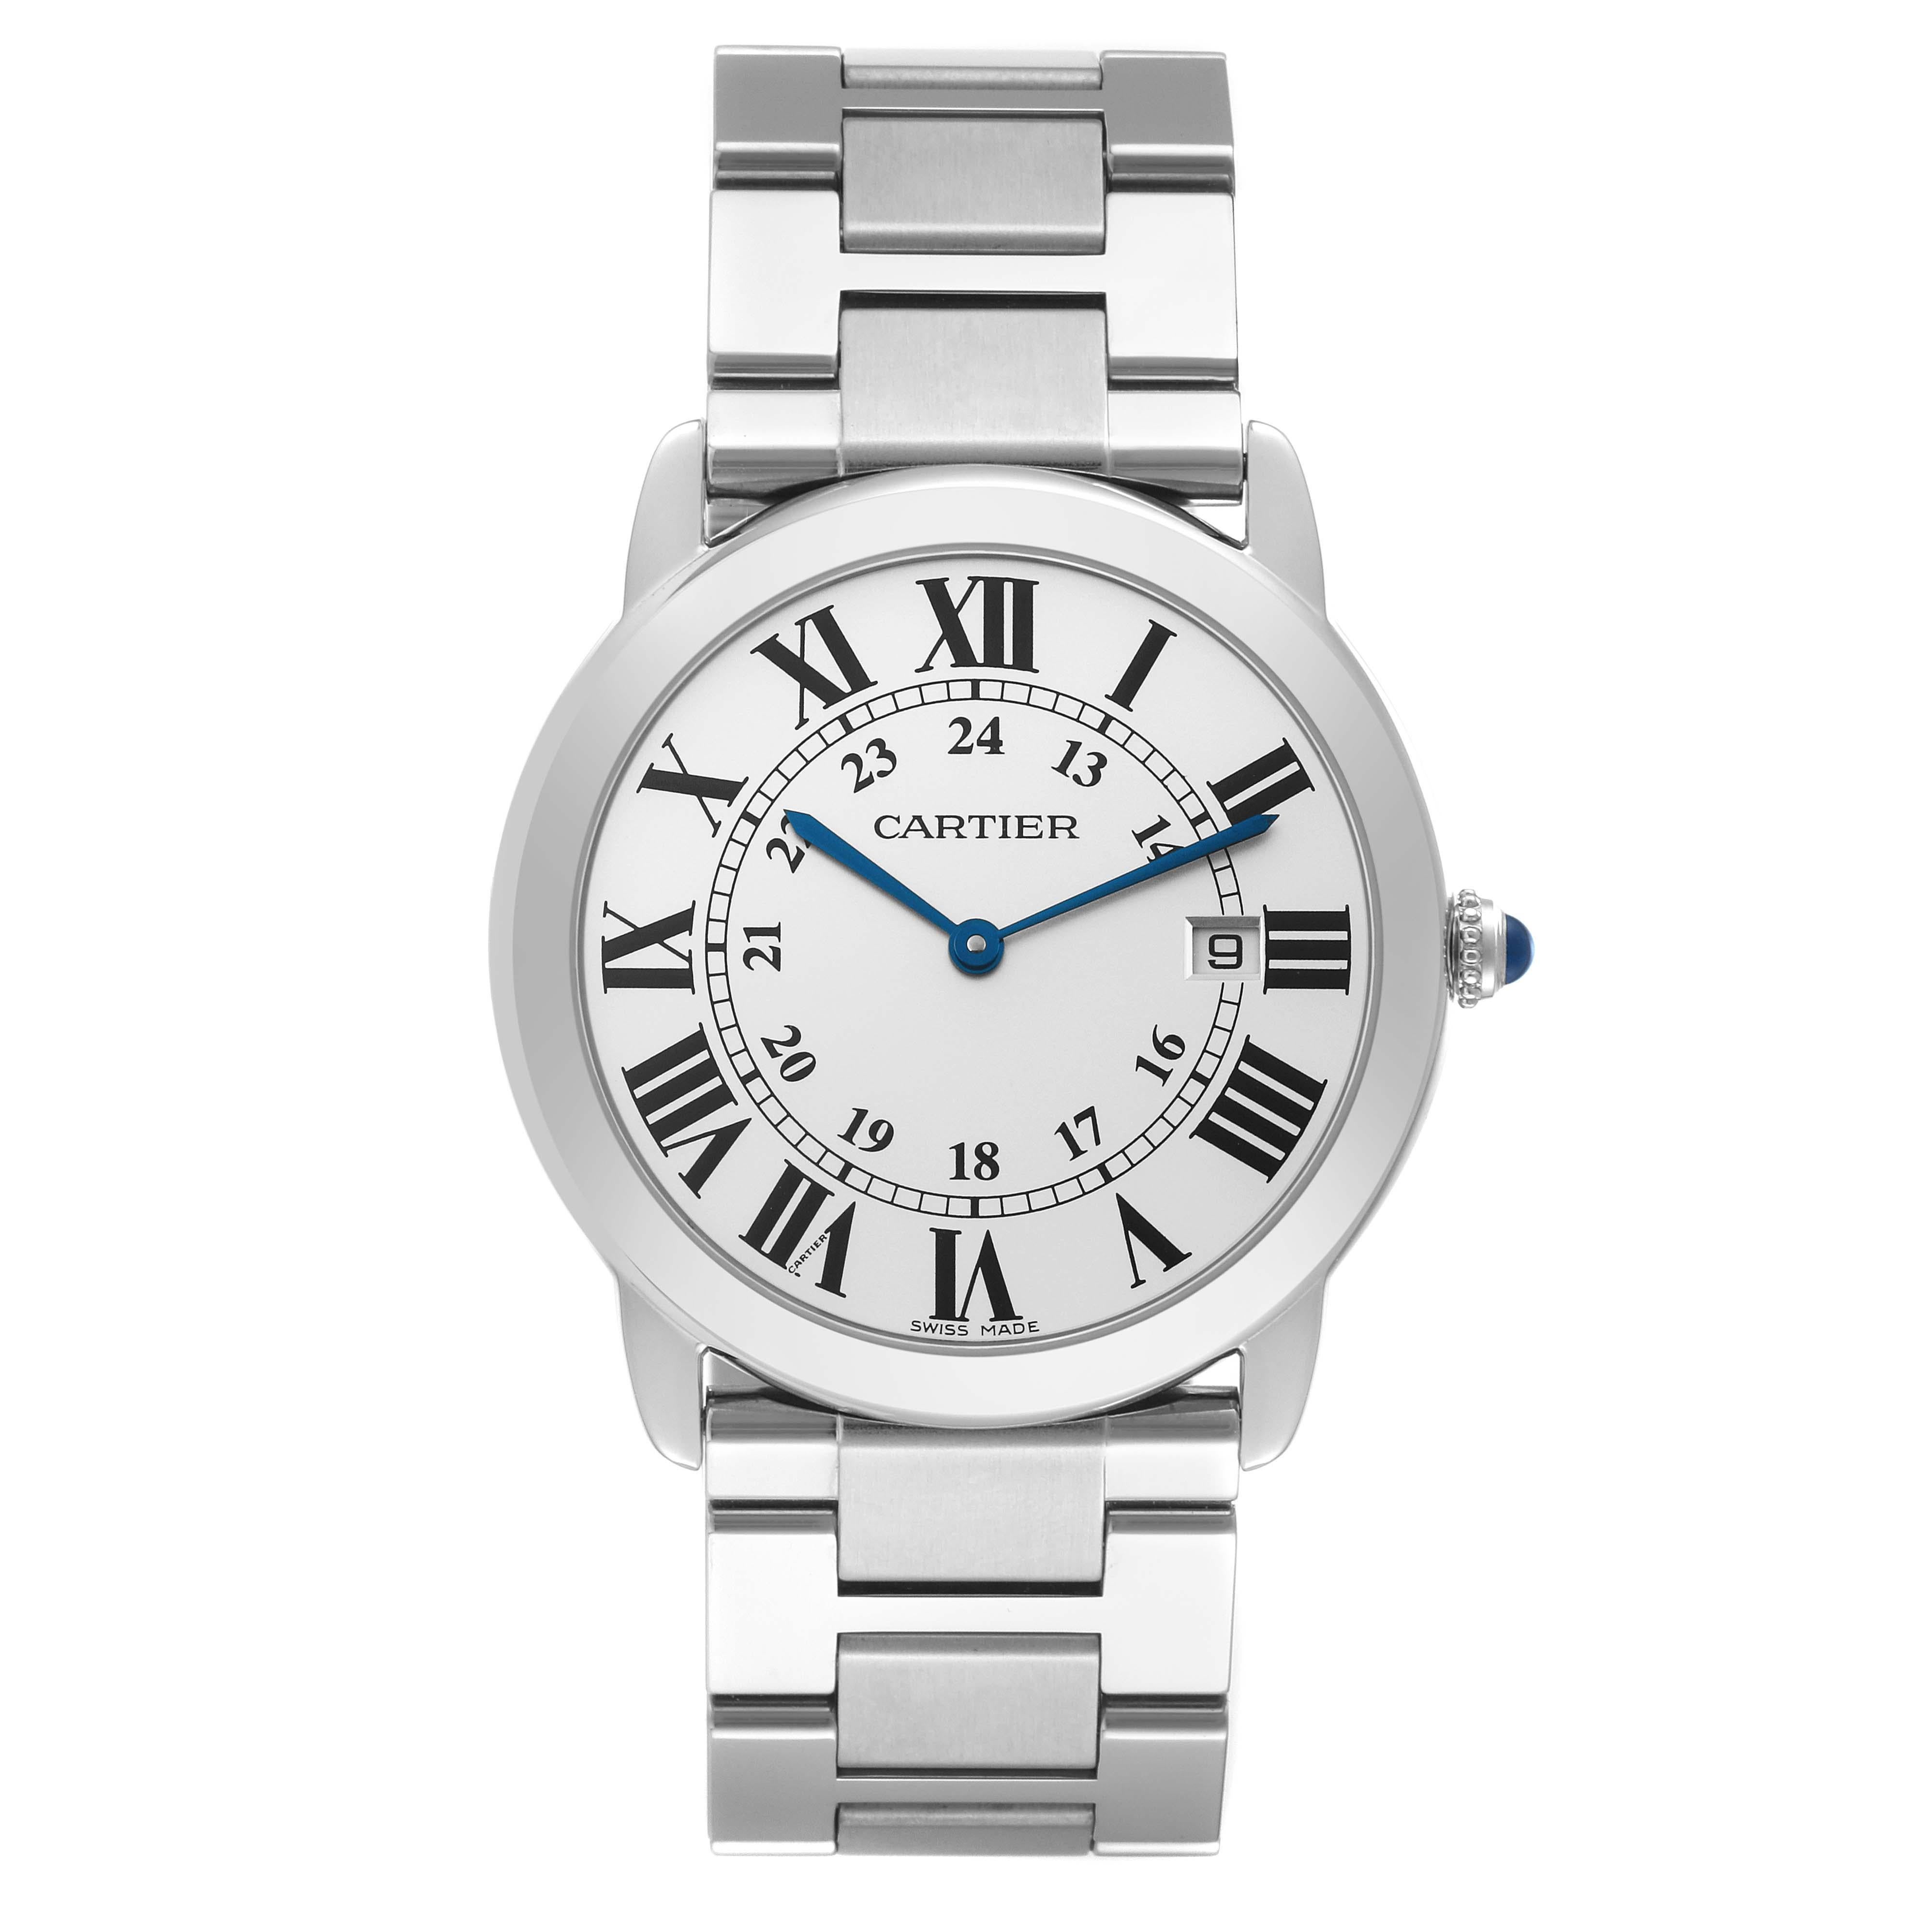 Cartier Ronde Solo Large 36mm Steel Mens Watch W6701005. Quartz movement. Stainless steel case 36.0 mm in diameter. Circular grained crown set with blue spinel cabochon. . Scratch resistant sapphire crystal. Silvered opaline dial with black Roman